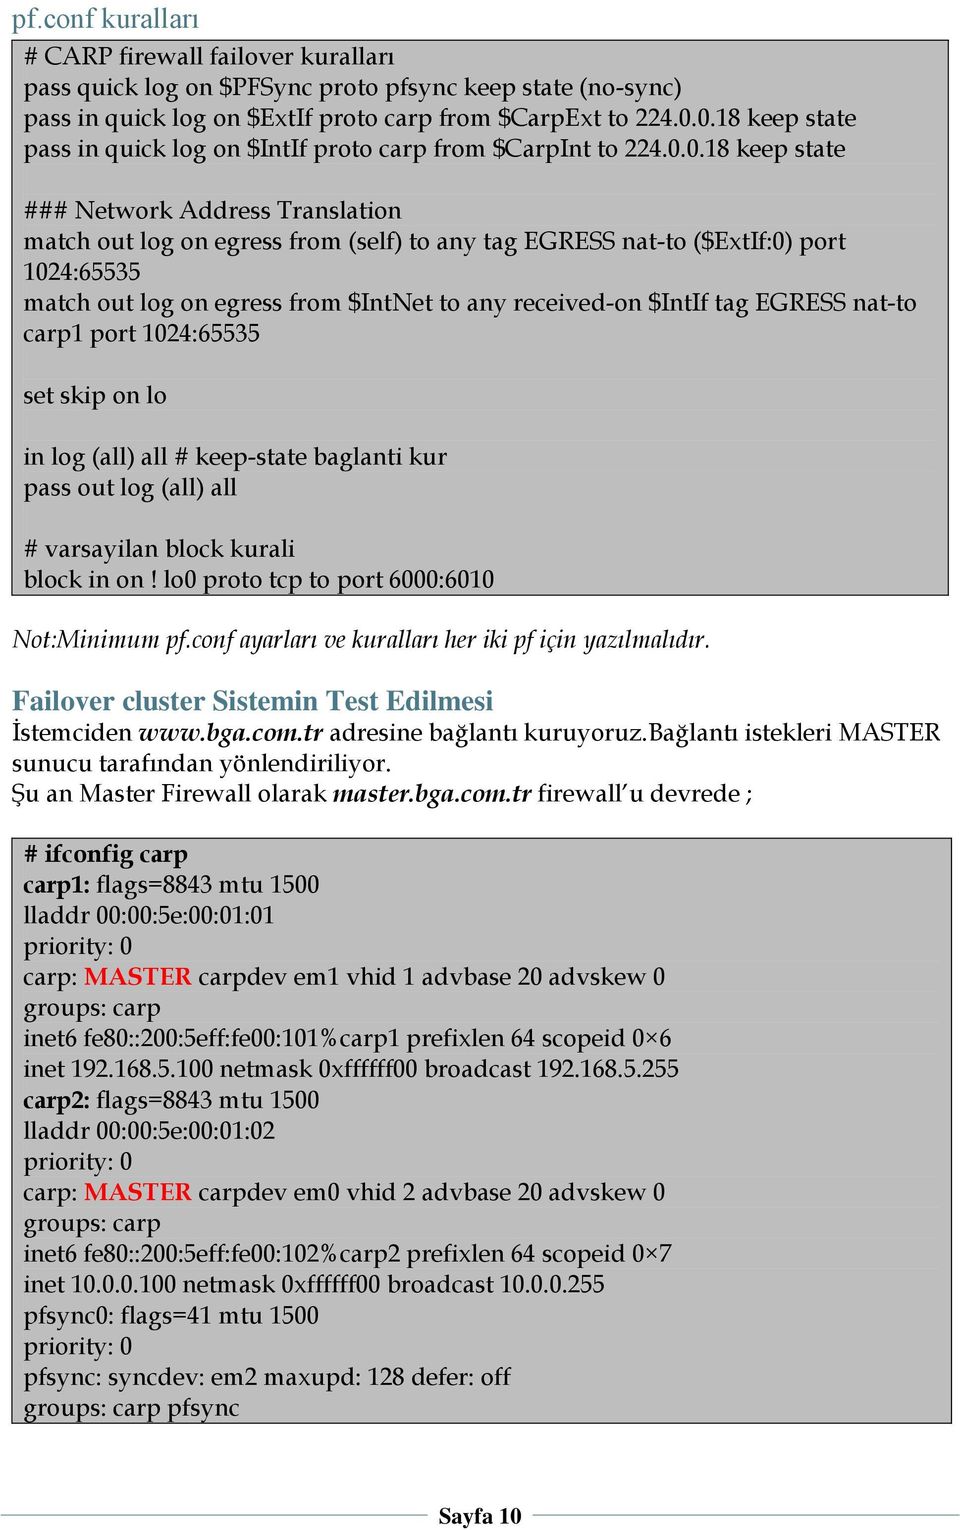 port 1024:65535 match out log on egress from $IntNet to any received-on $IntIf tag EGRESS nat-to carp1 port 1024:65535 set skip on lo in log (all) all # keep-state baglanti kur pass out log (all) all